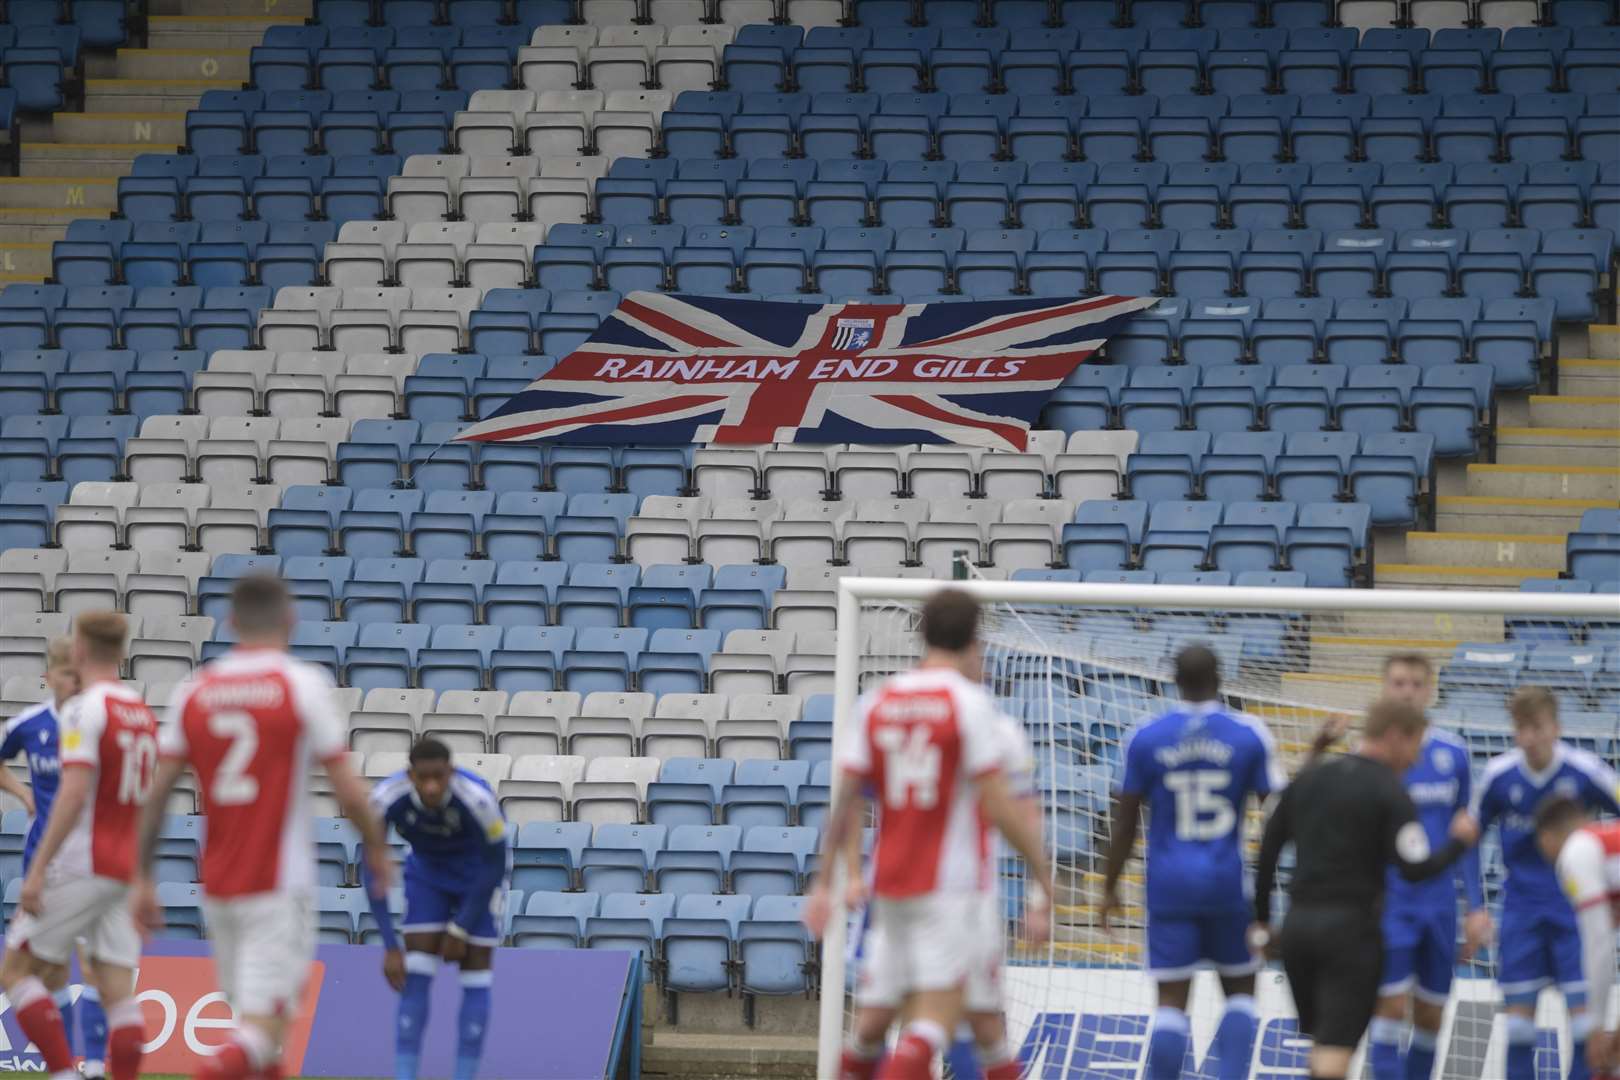 Gillingham flag in the stands as the Rainham End remains empty Picture: Barry Goodwin